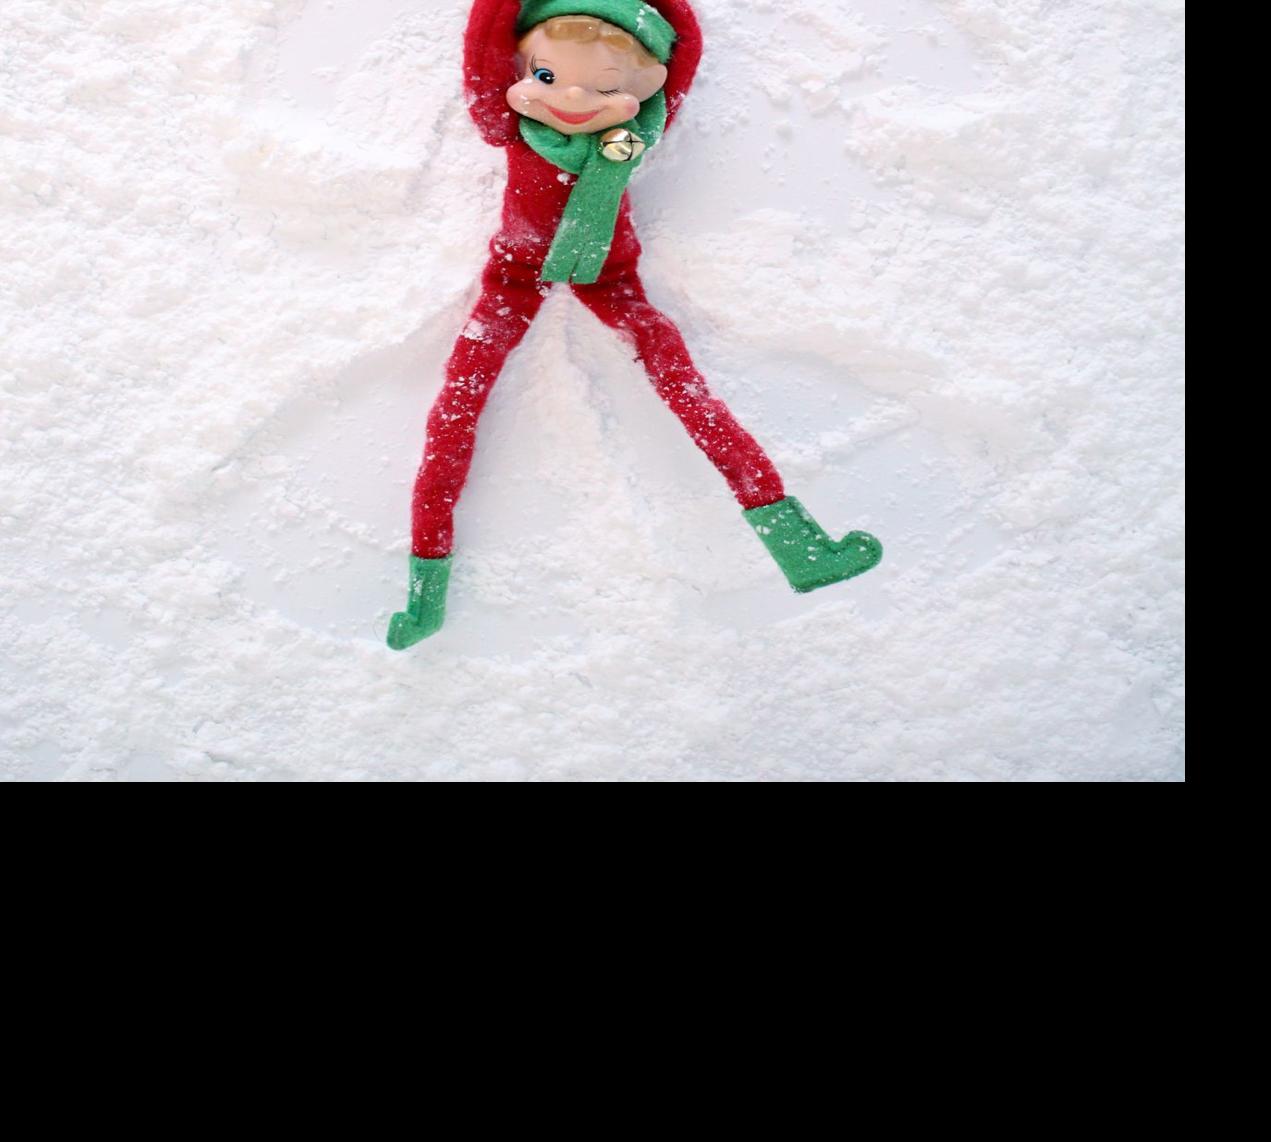 Meet the Family Behind 'The Elf on the Shelf' and 13 Million Scout Elves -  Forbes Vetted